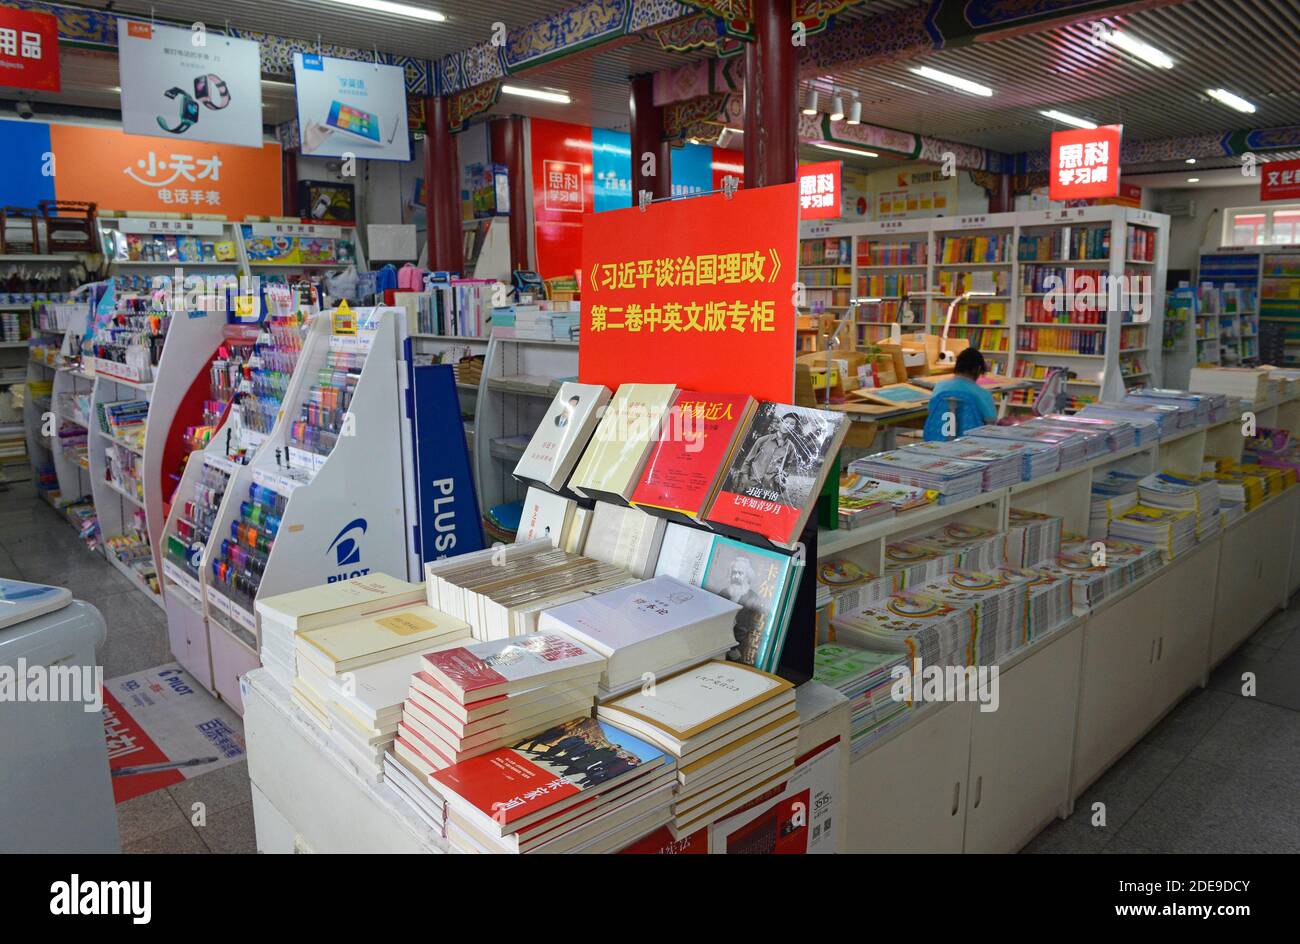 Books about Xi Jinping take pride of place at the end of an aisle in a Xinhua bookshop in Xicheng district, Beijing, China Stock Photo